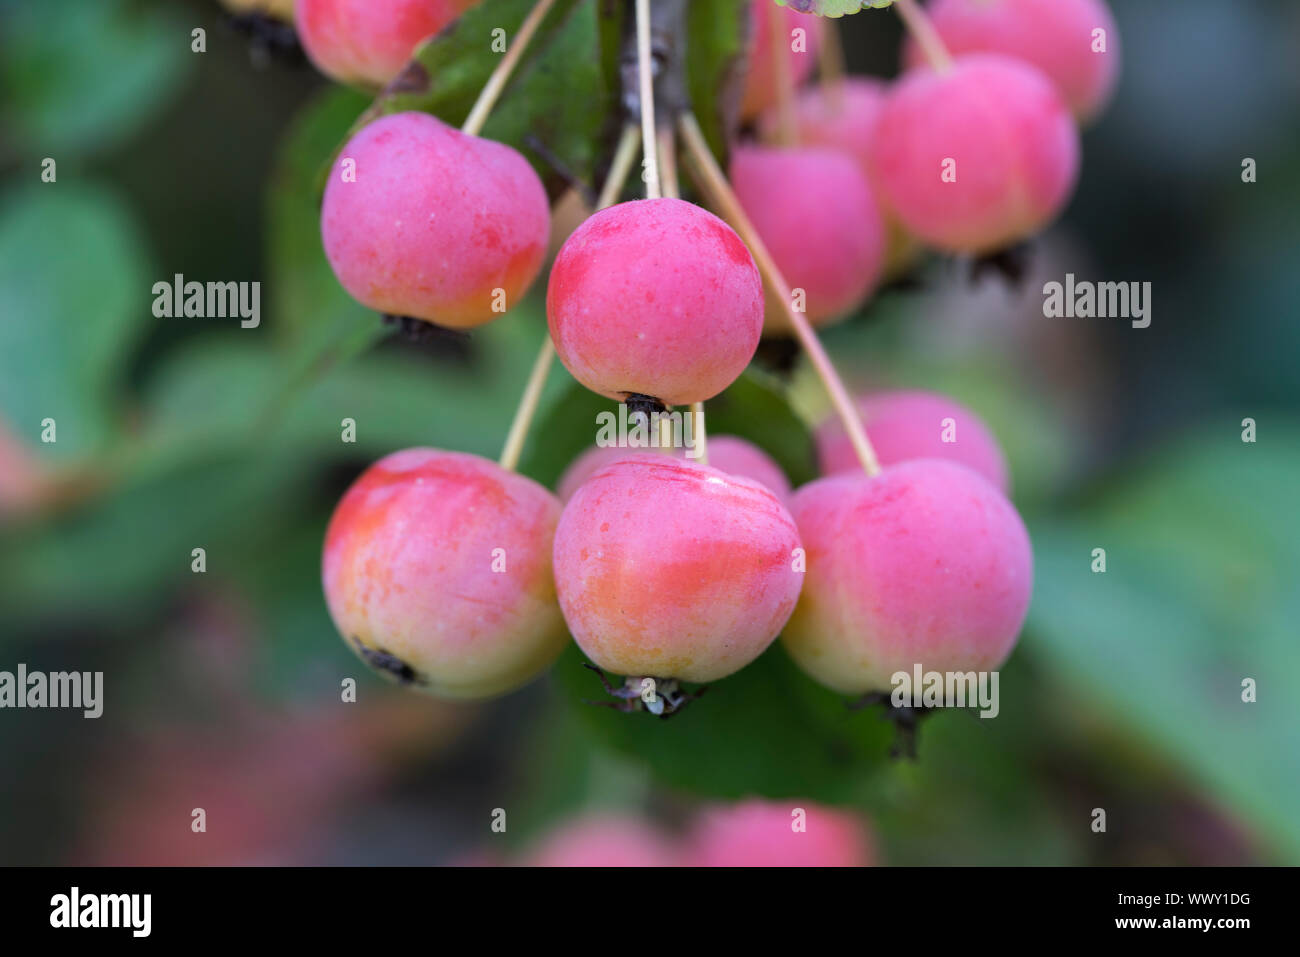 Decorative apples in autumn, Ornamental Apples, Germany, Europe Stock Photo